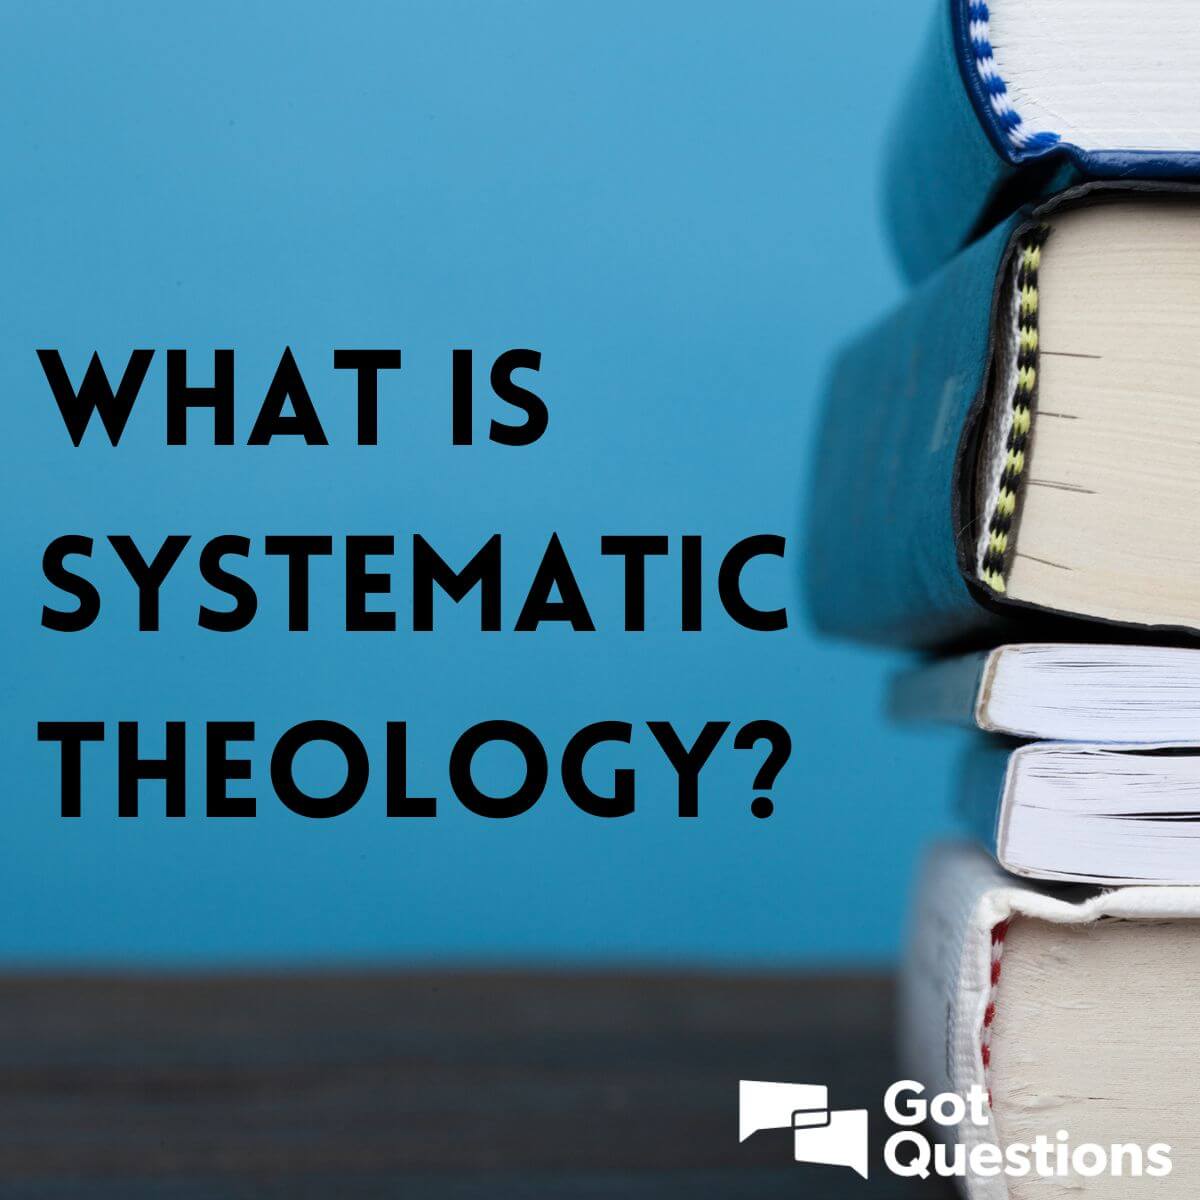 What is systematic theology?